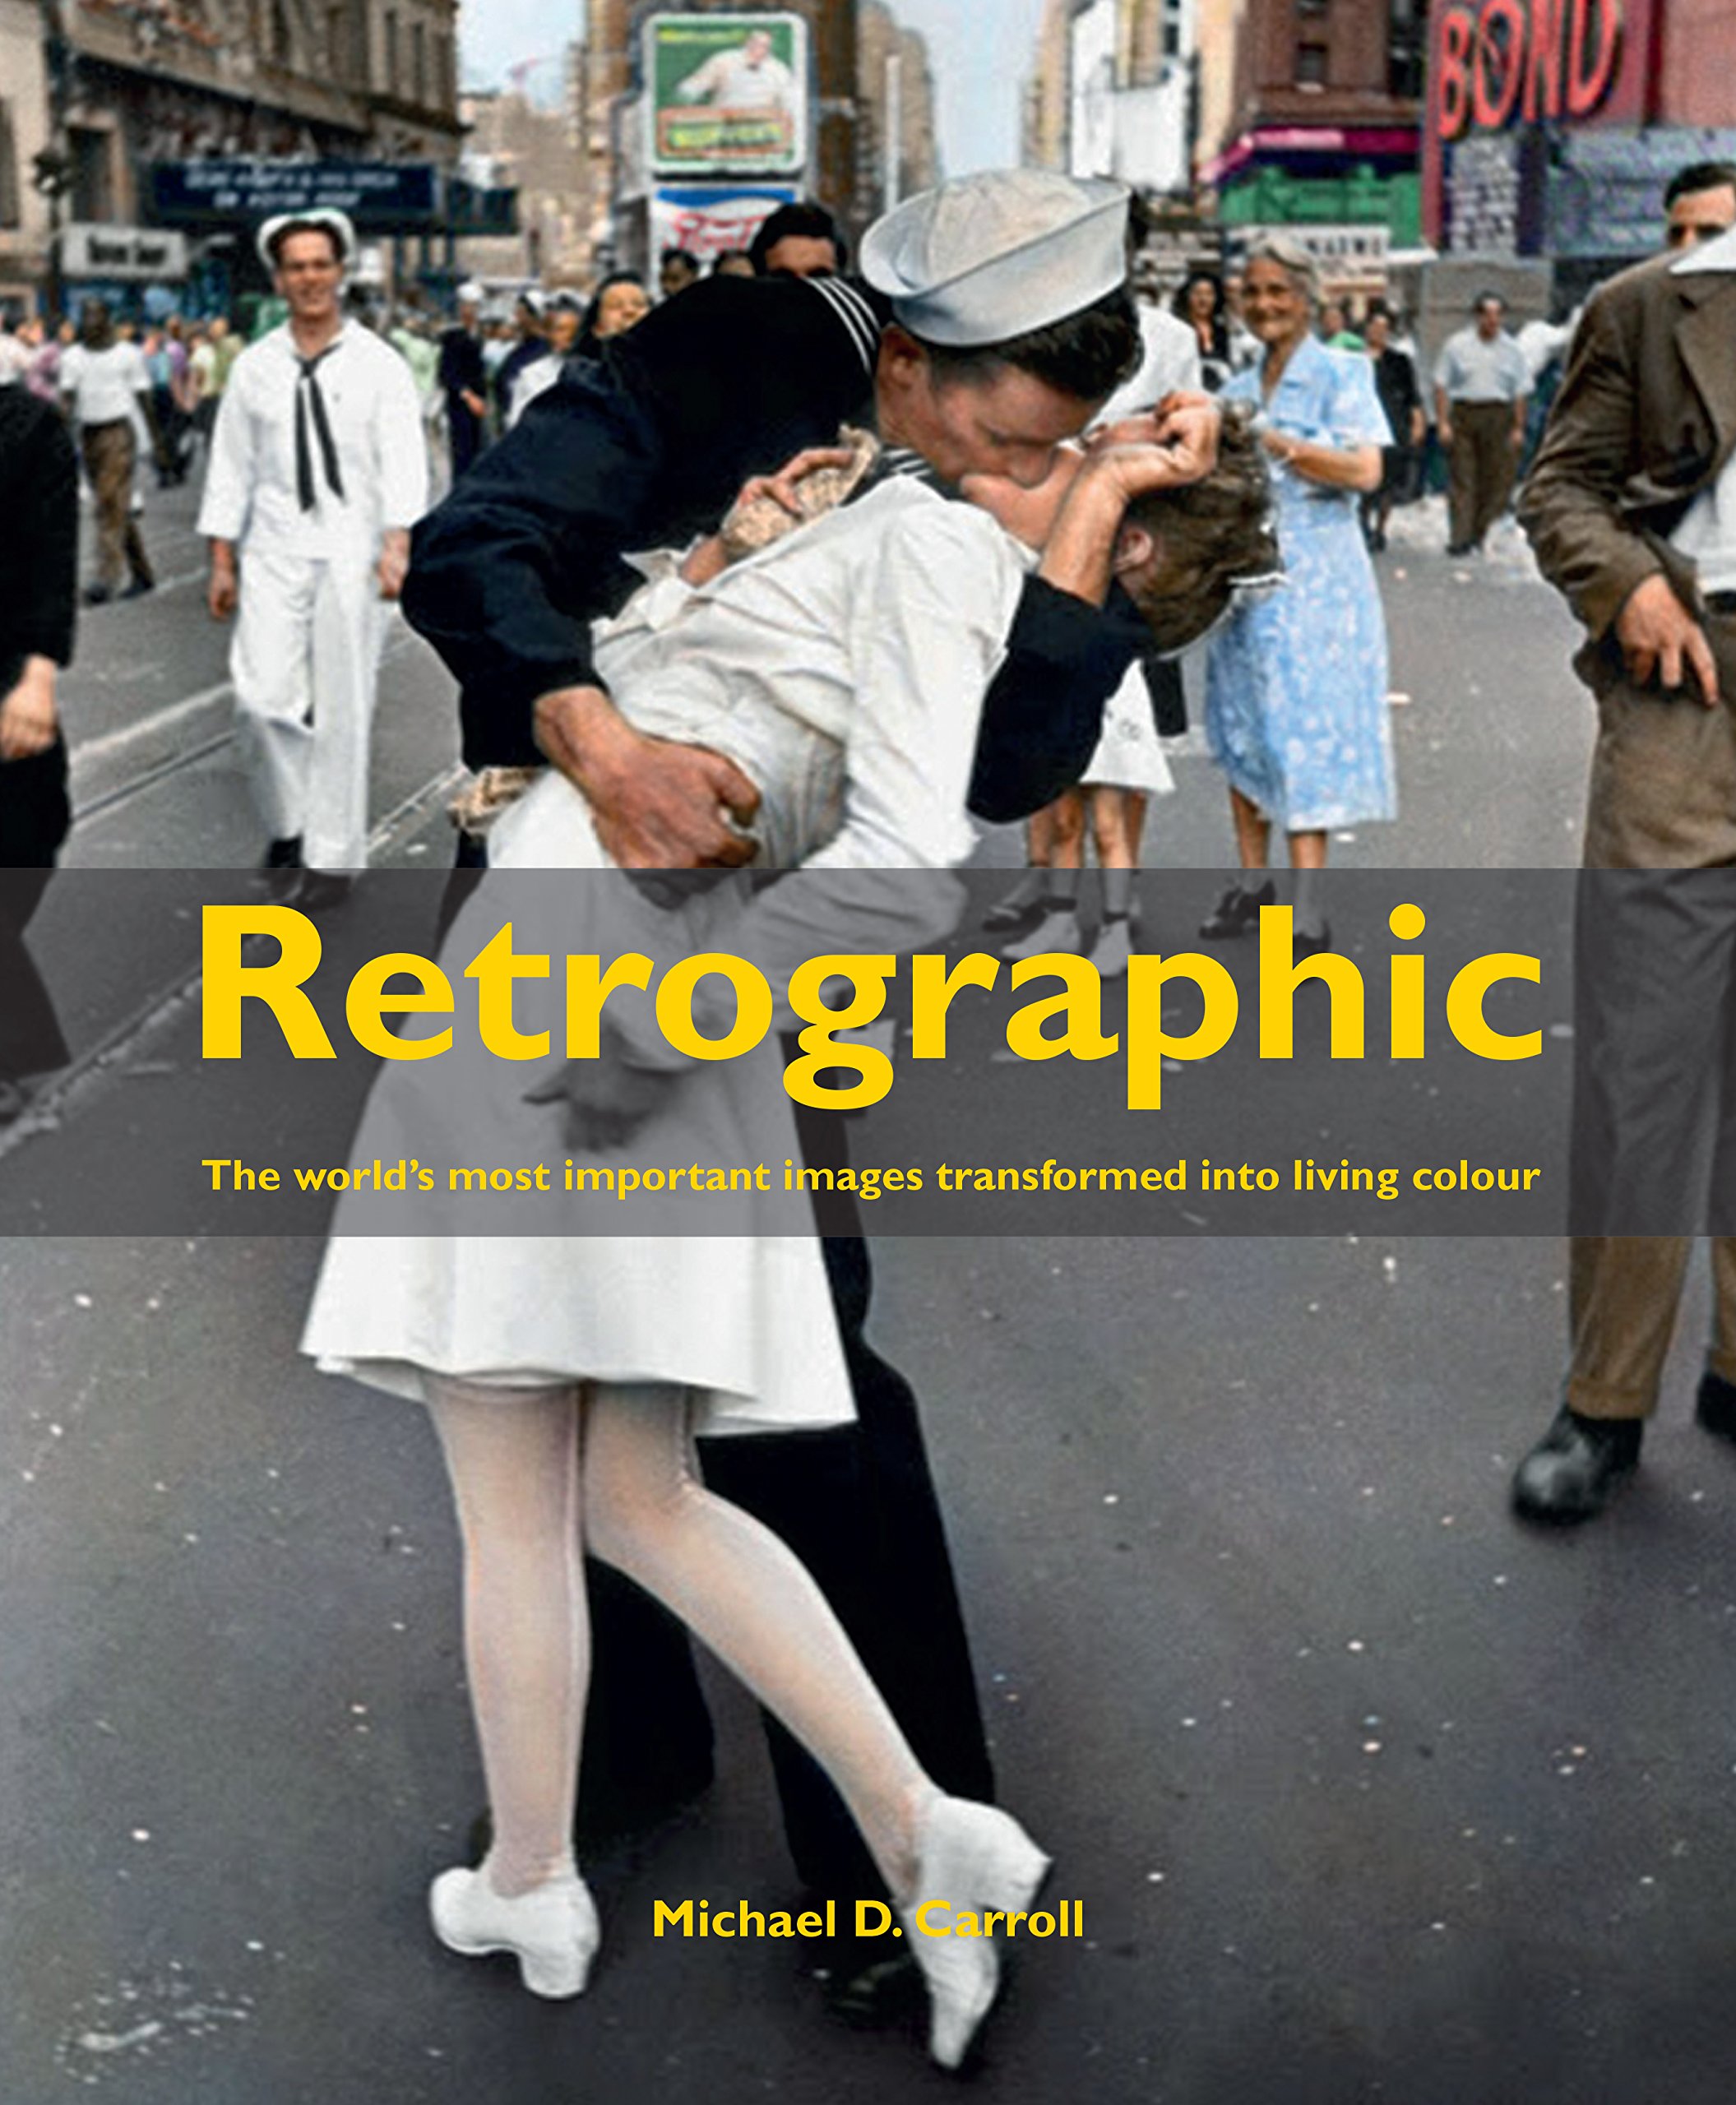 Retrographic - History's Most Exciting Images Transformed into Living Colour | Michael D. Carroll